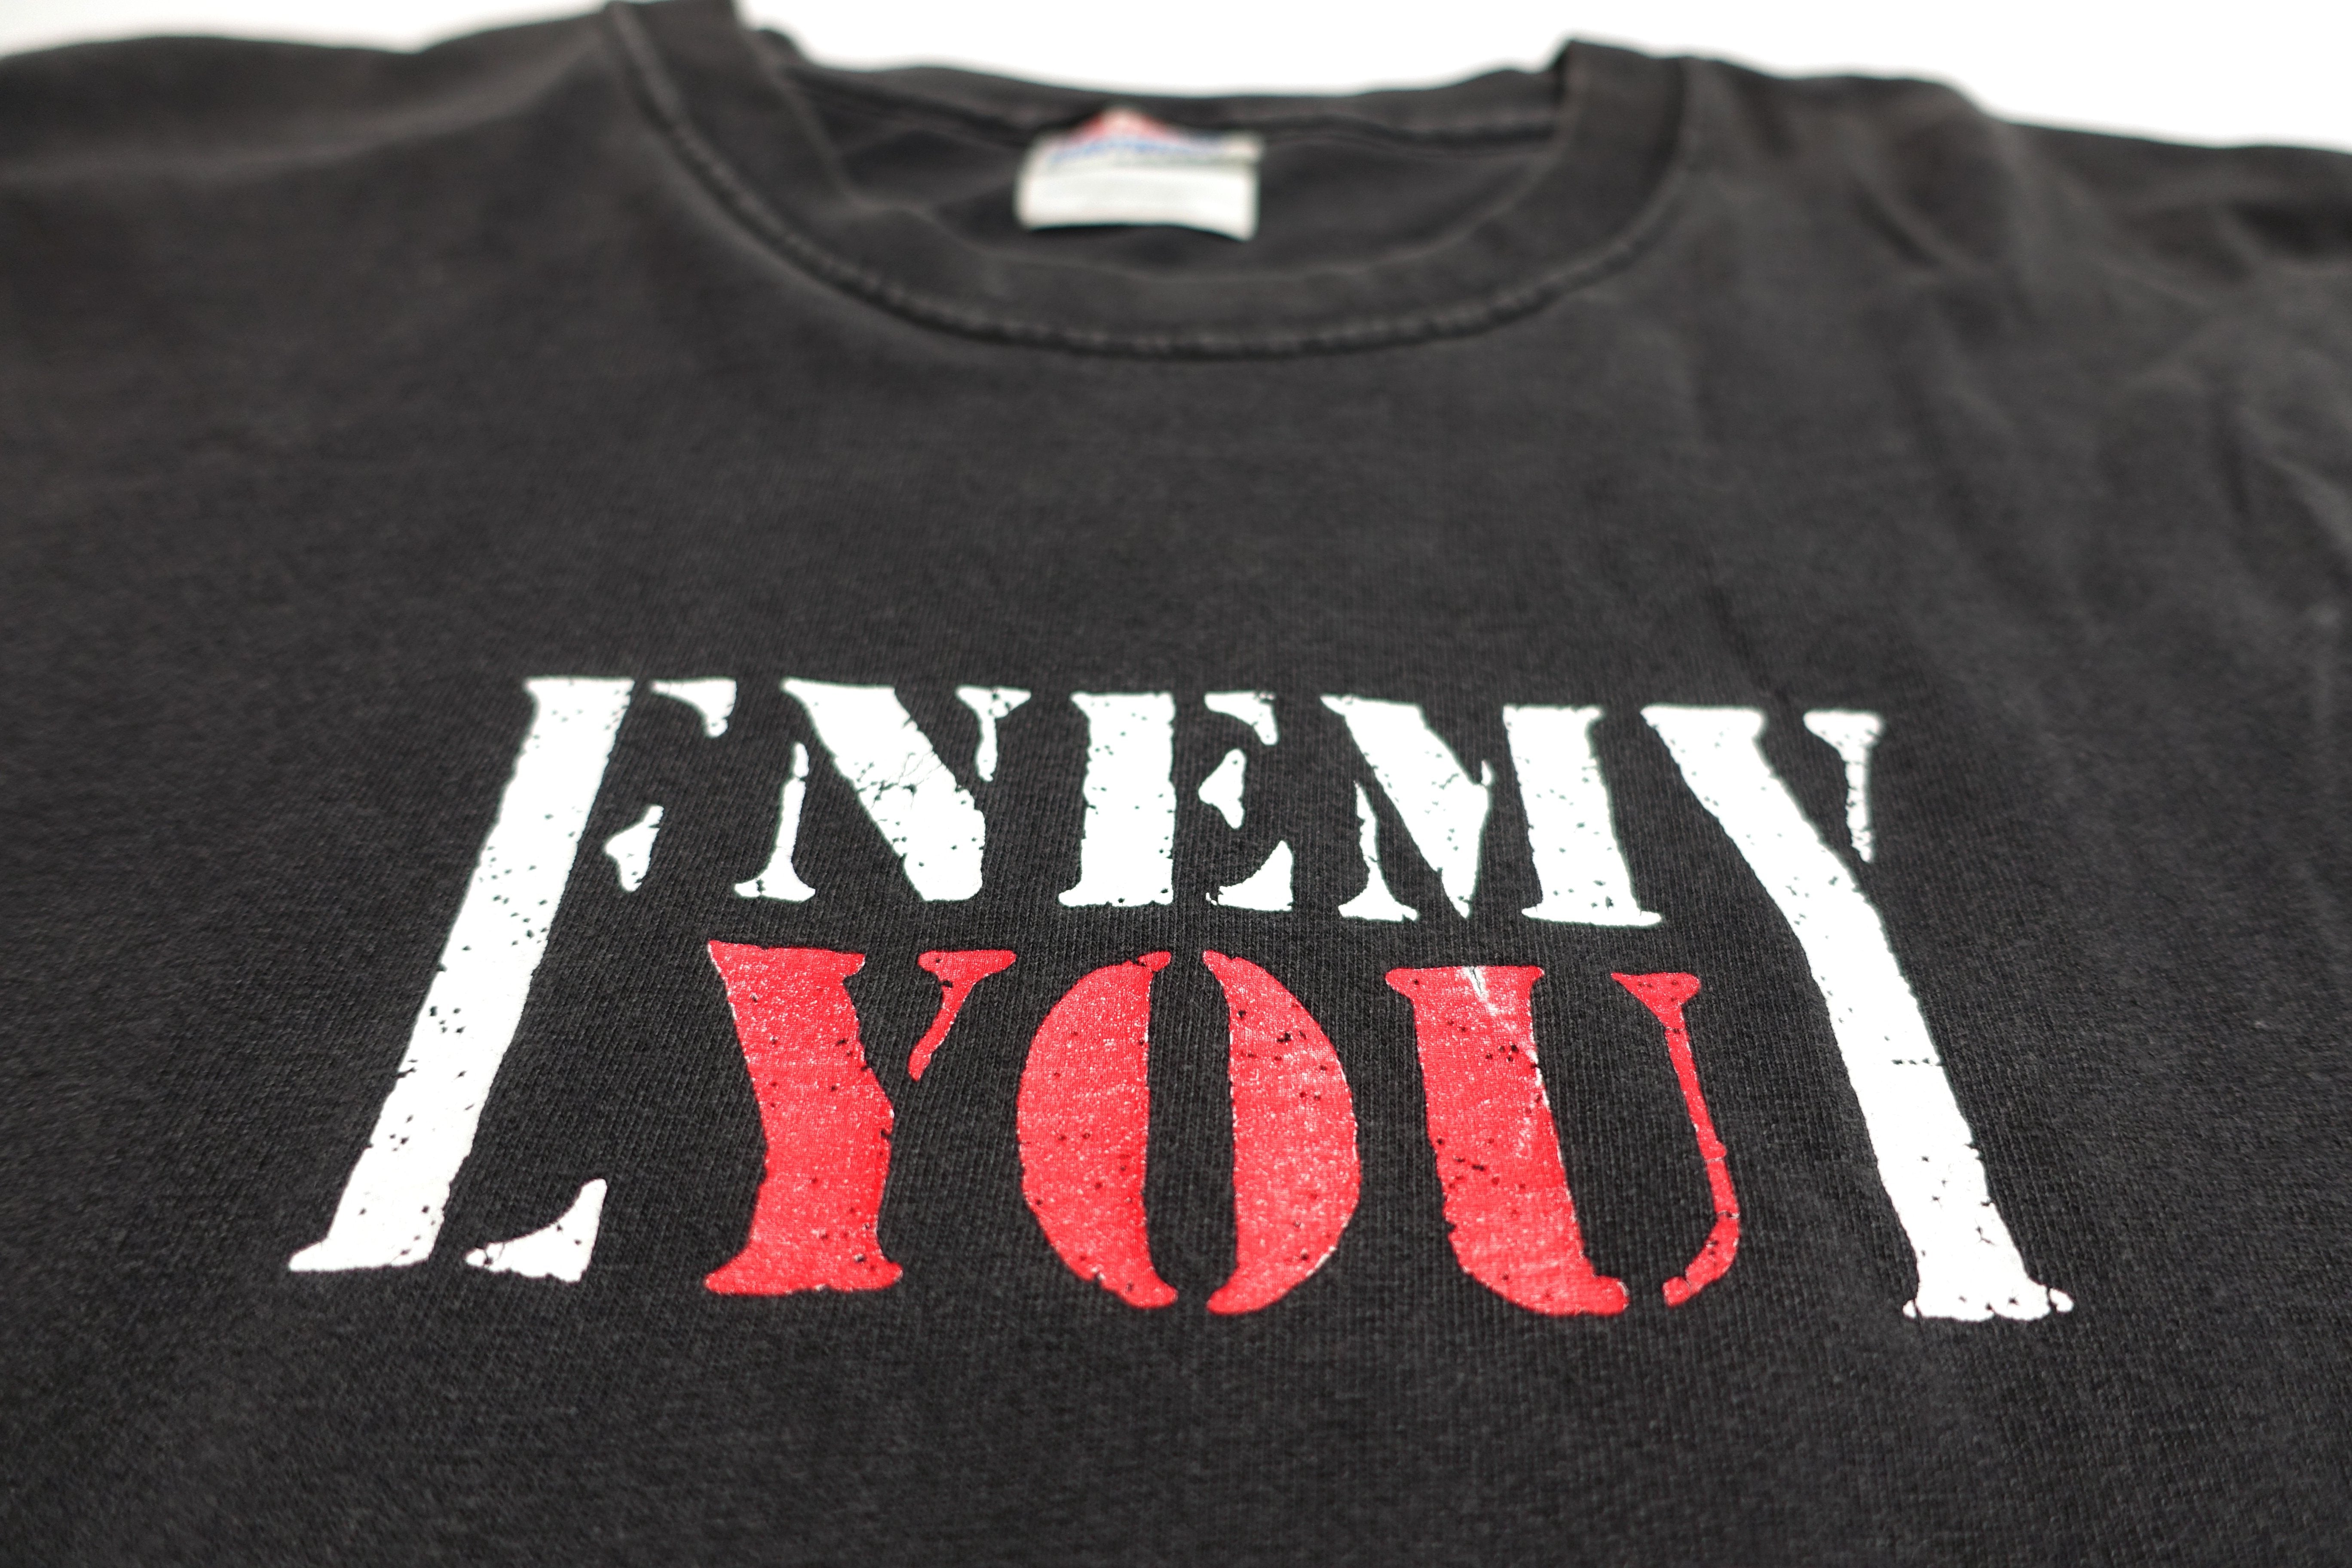 Enemy You - Where No One Knows My Name 2000 Tour Shirt Size Large